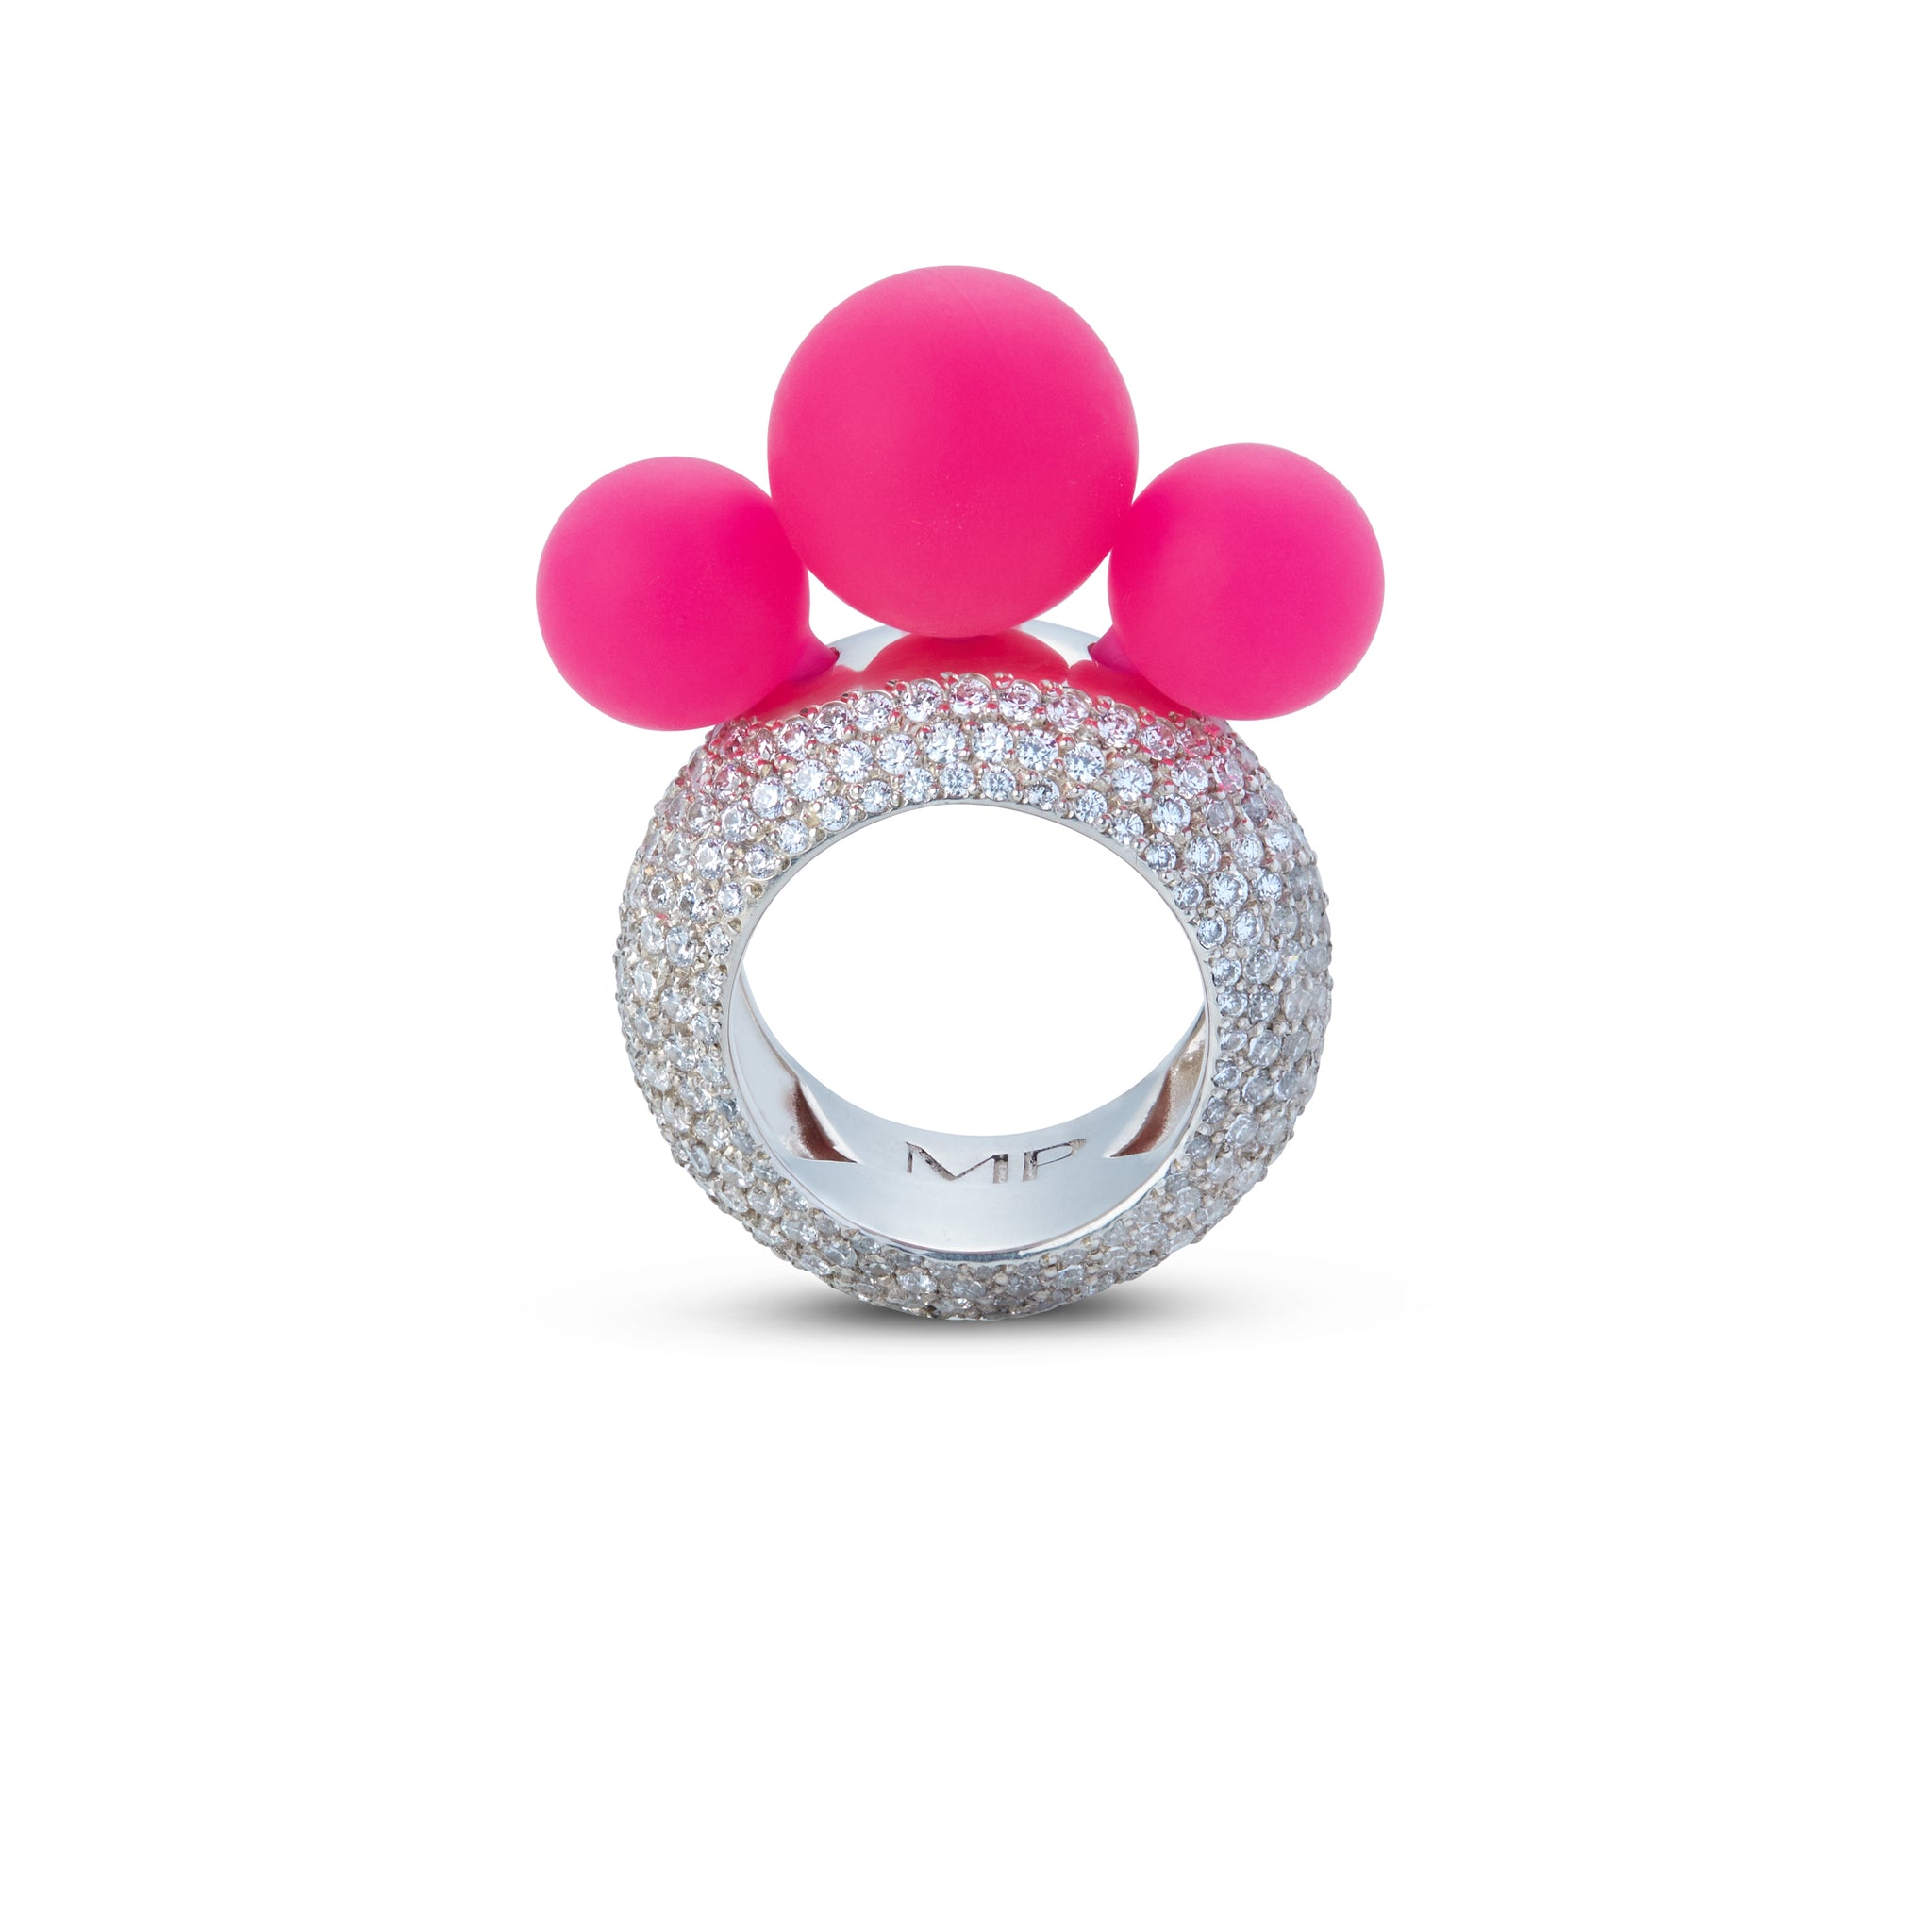 Madame Palm trilogy absolute luxury ring self-love in fuchsia silicone pearls and white gold 18kt band and diamonds